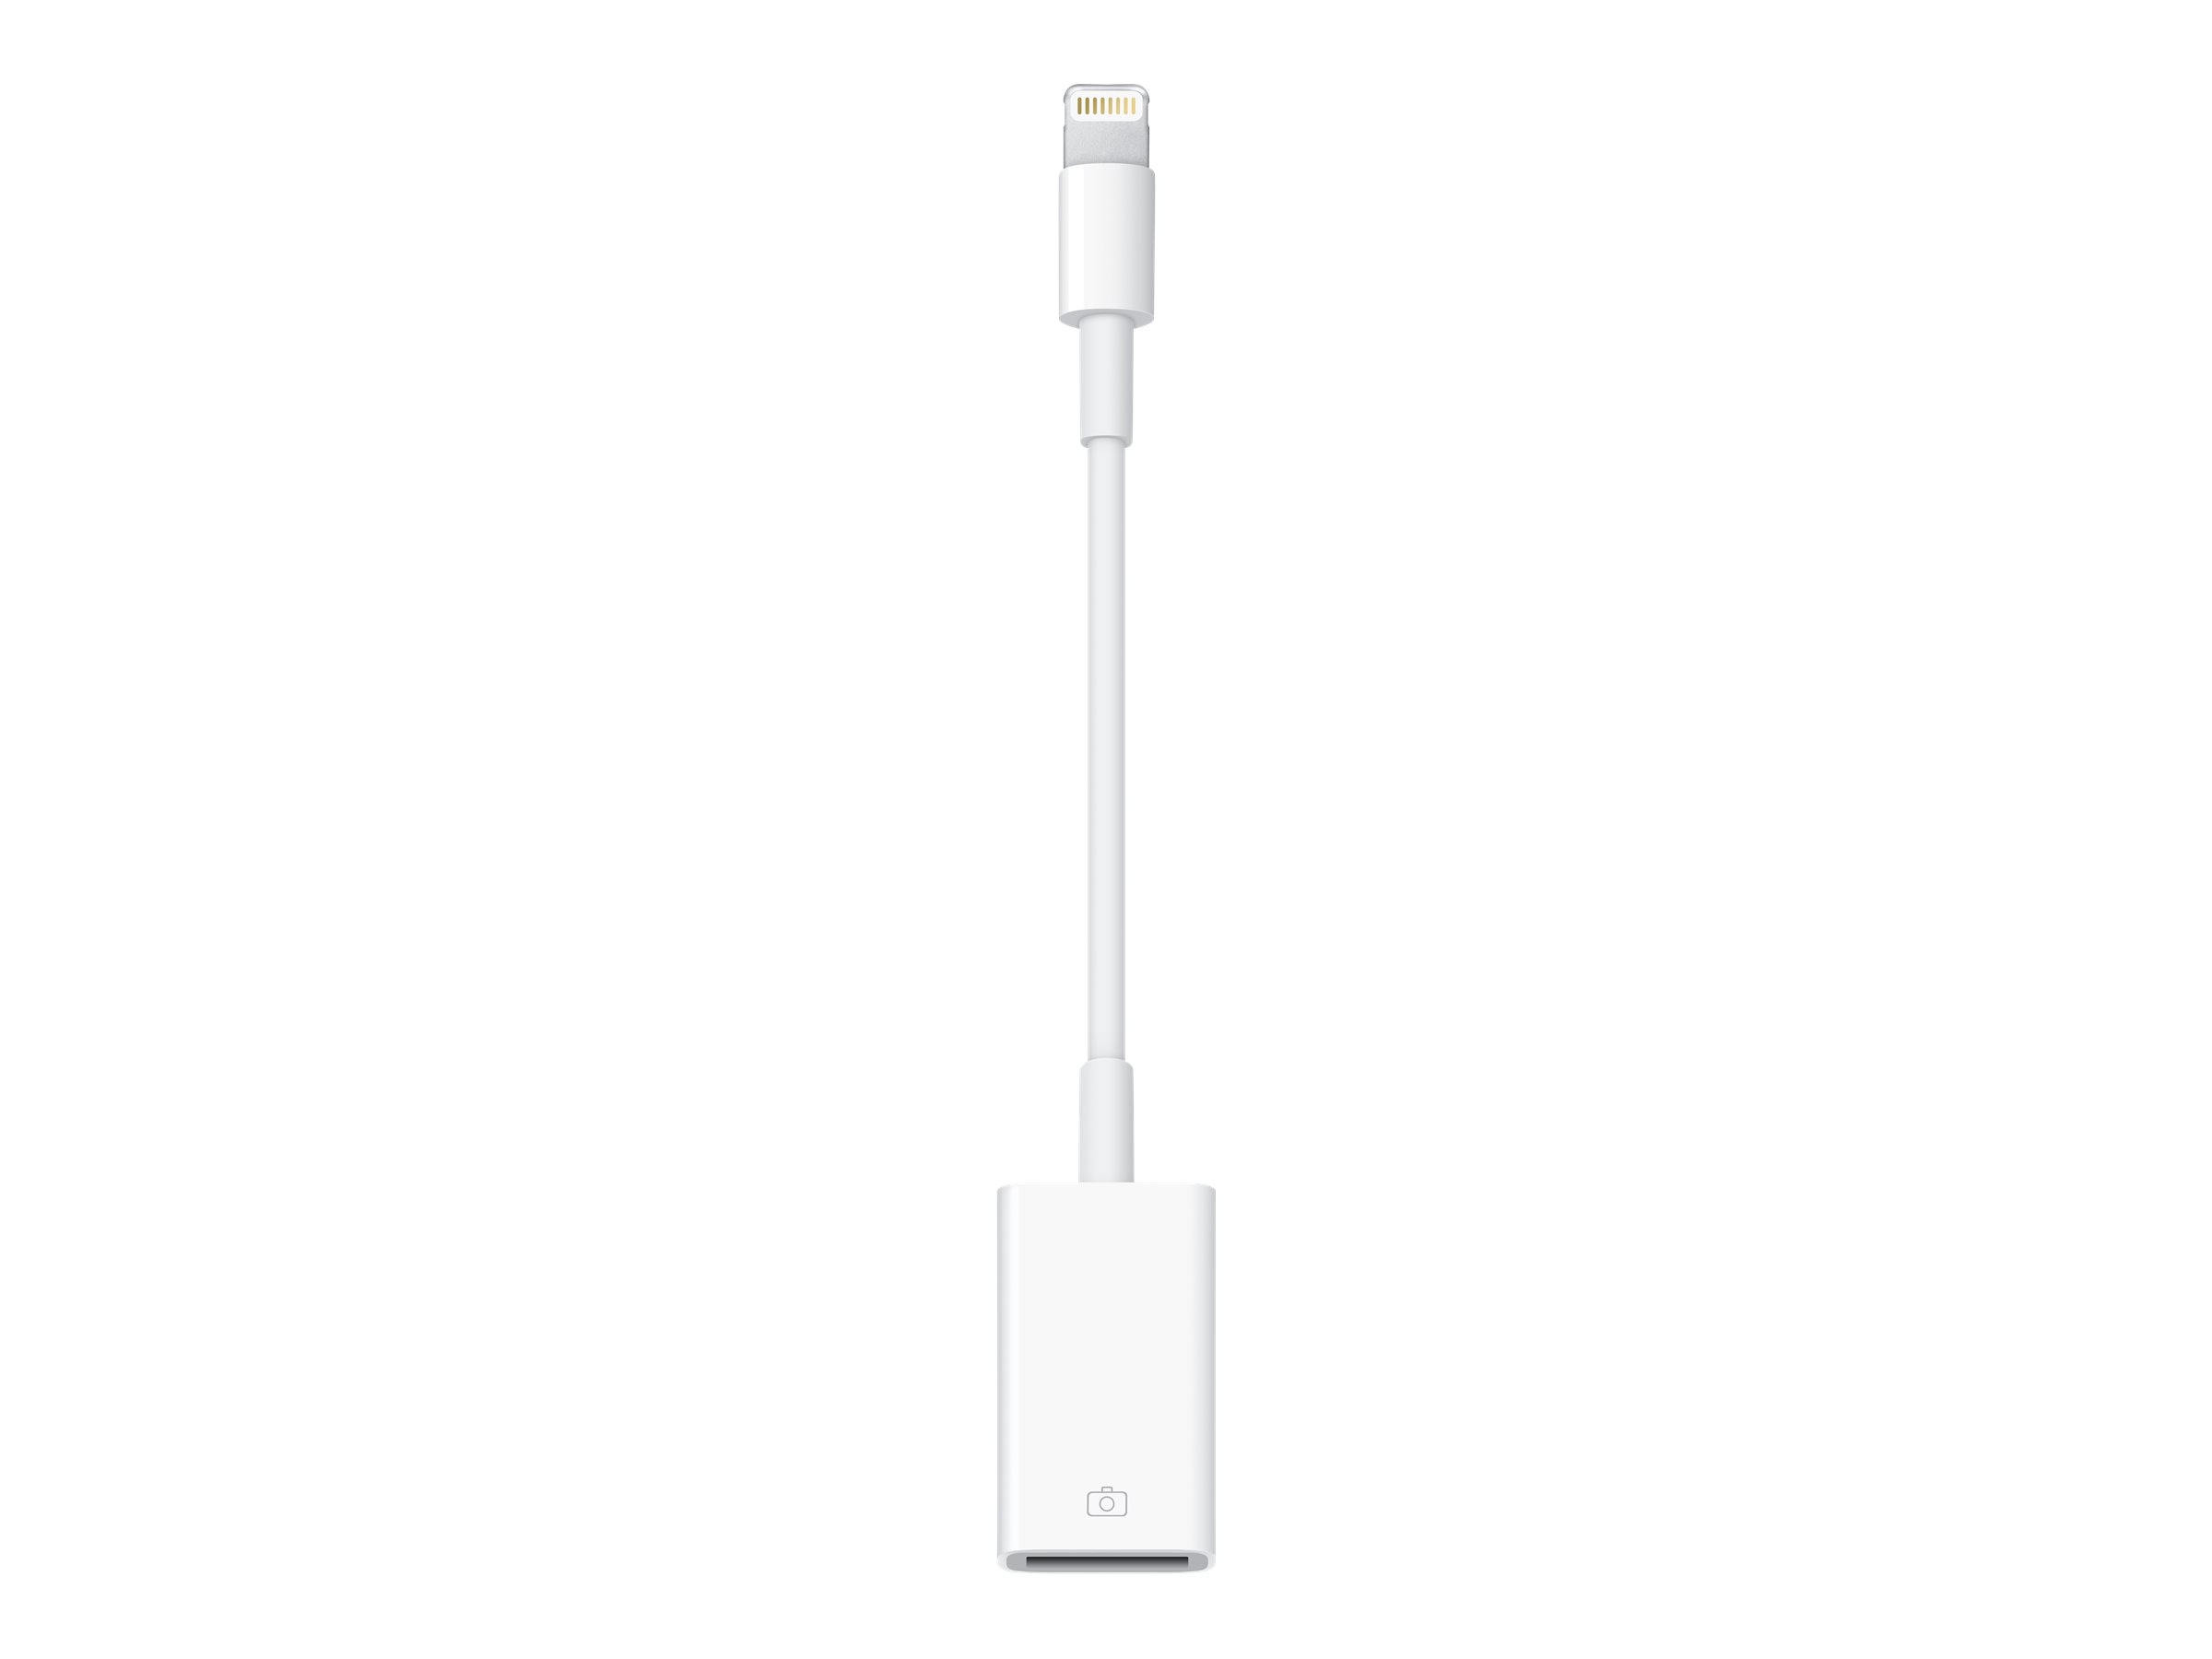 Apple Lightning to USB Camera Adapter - Adaptateur Lightning - Lightning mâle pour USB femelle - MD821ZM/A - Accessoires pour systèmes audio domestiques